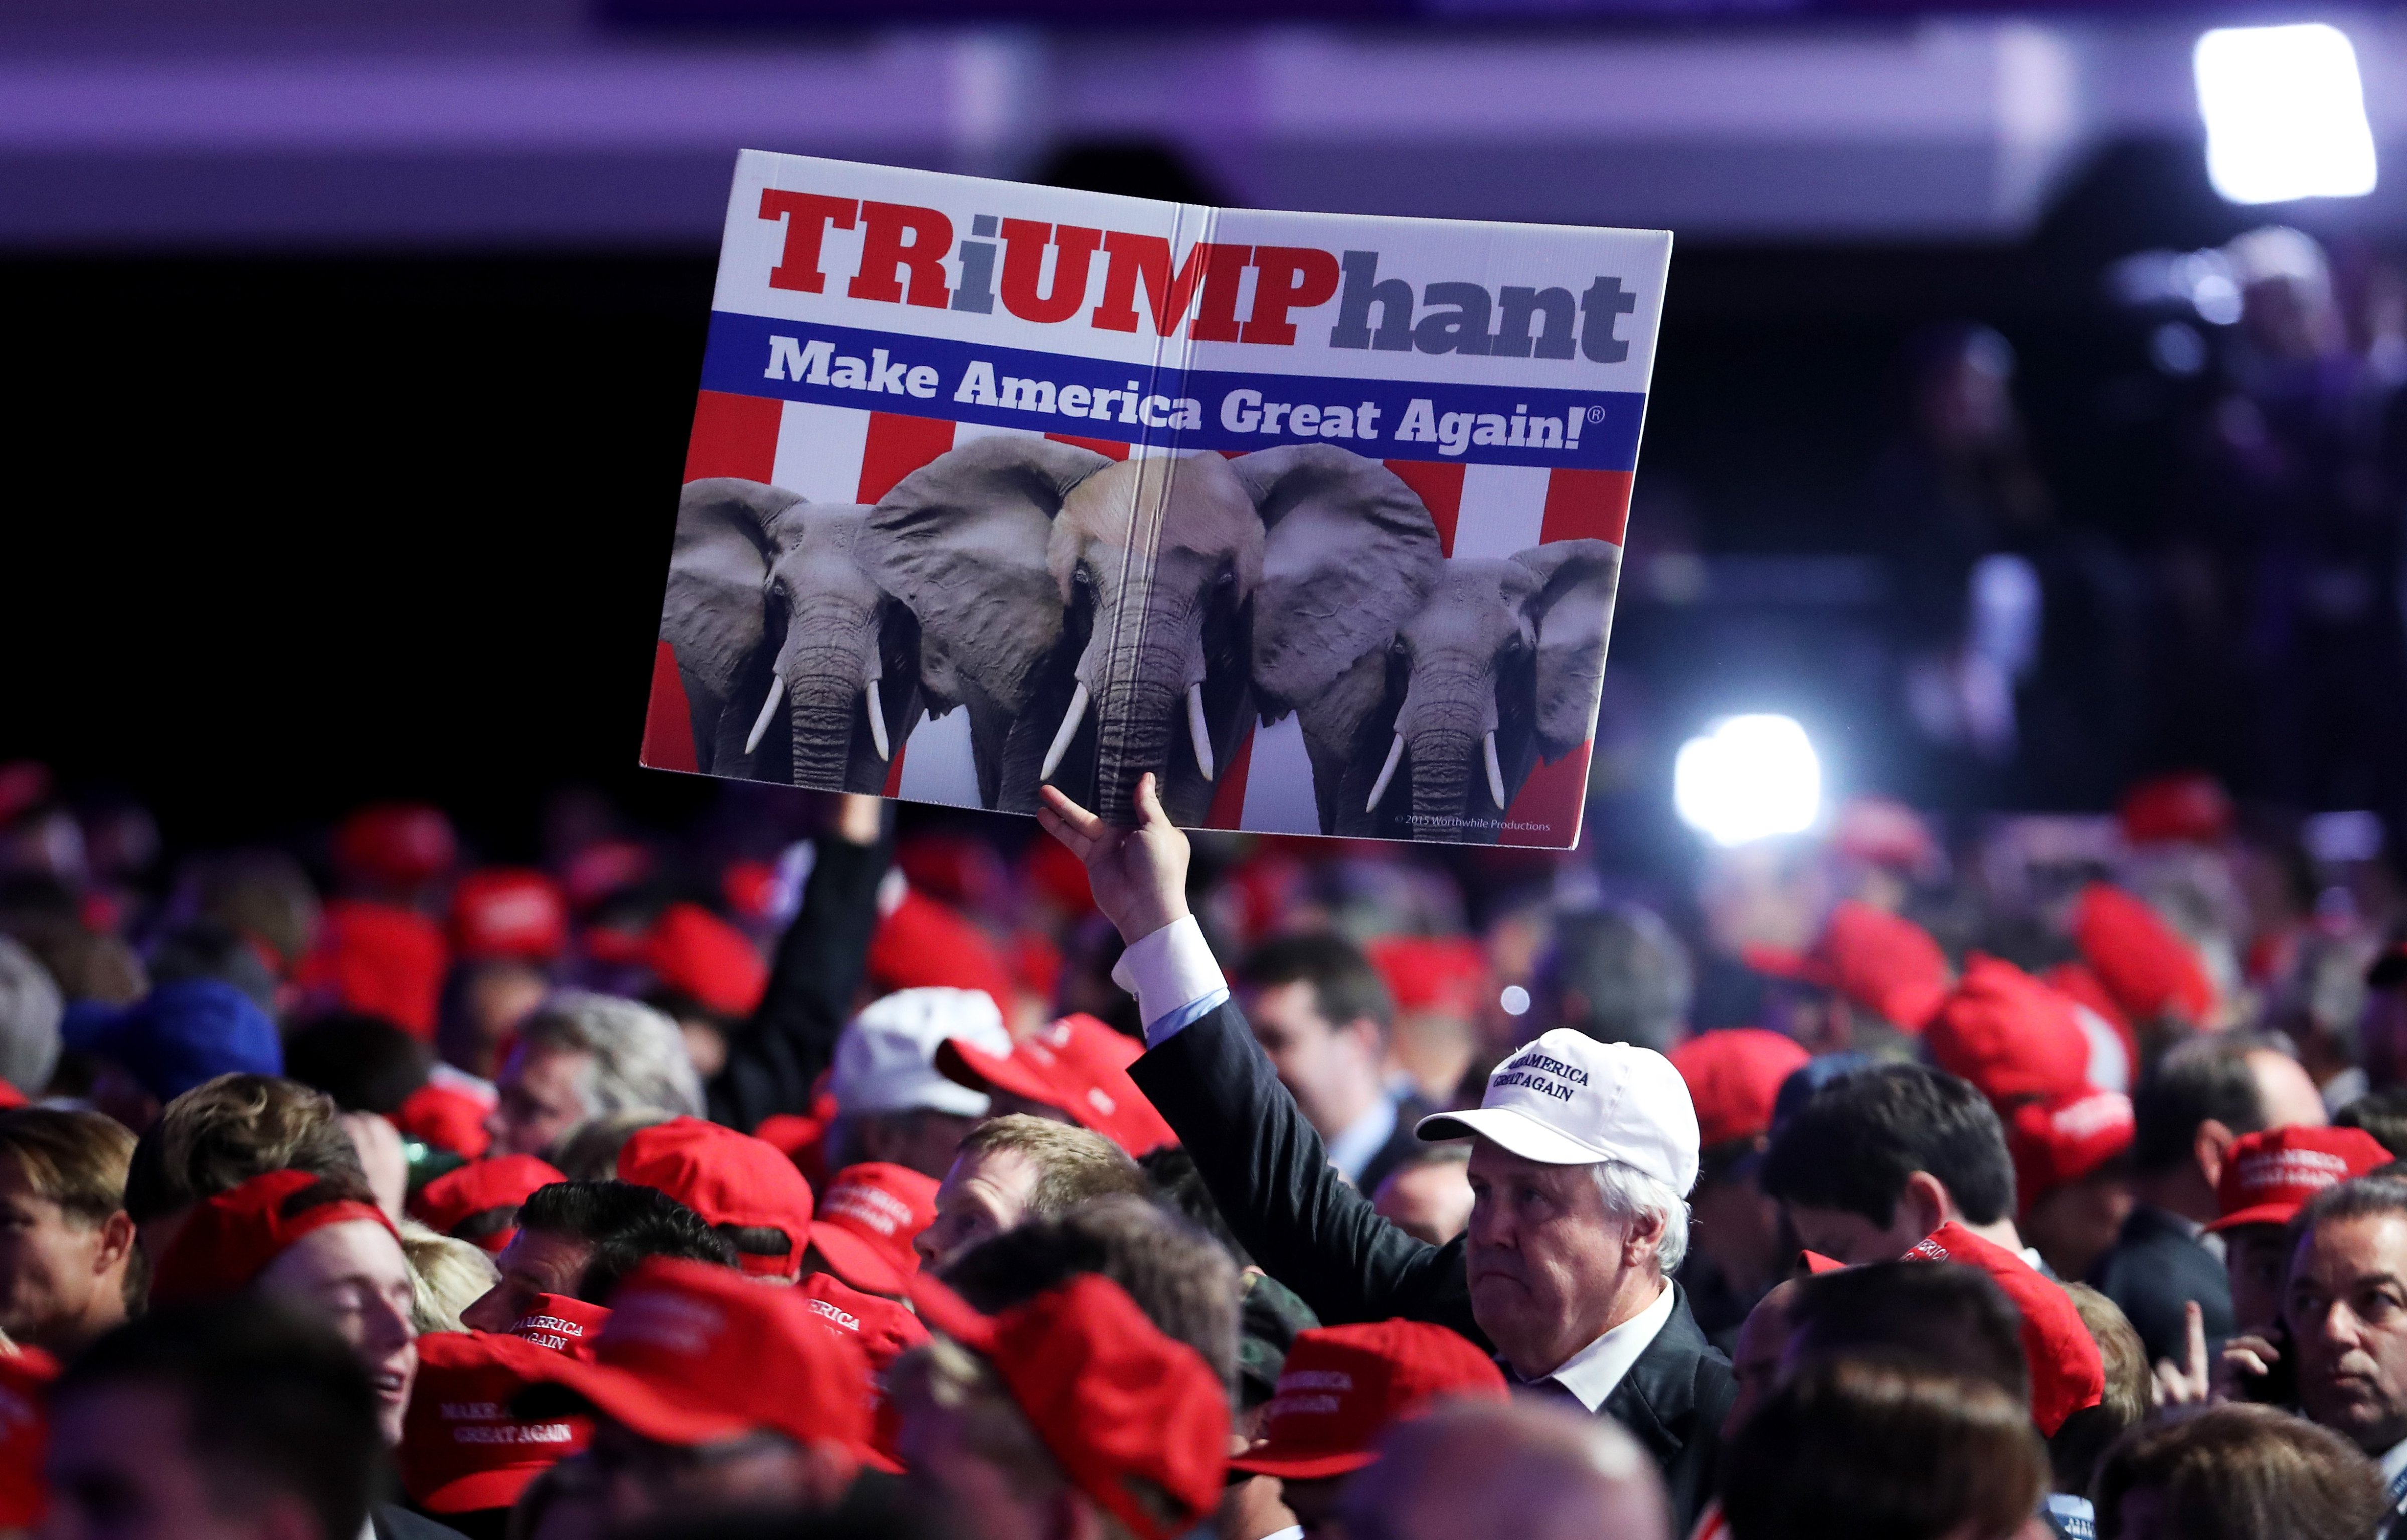 A supporter holds up a sign in support of Republican presidential nominee Donald Trump during the election night event at the New York Hilton Midtown on Nov. 8, 2016.